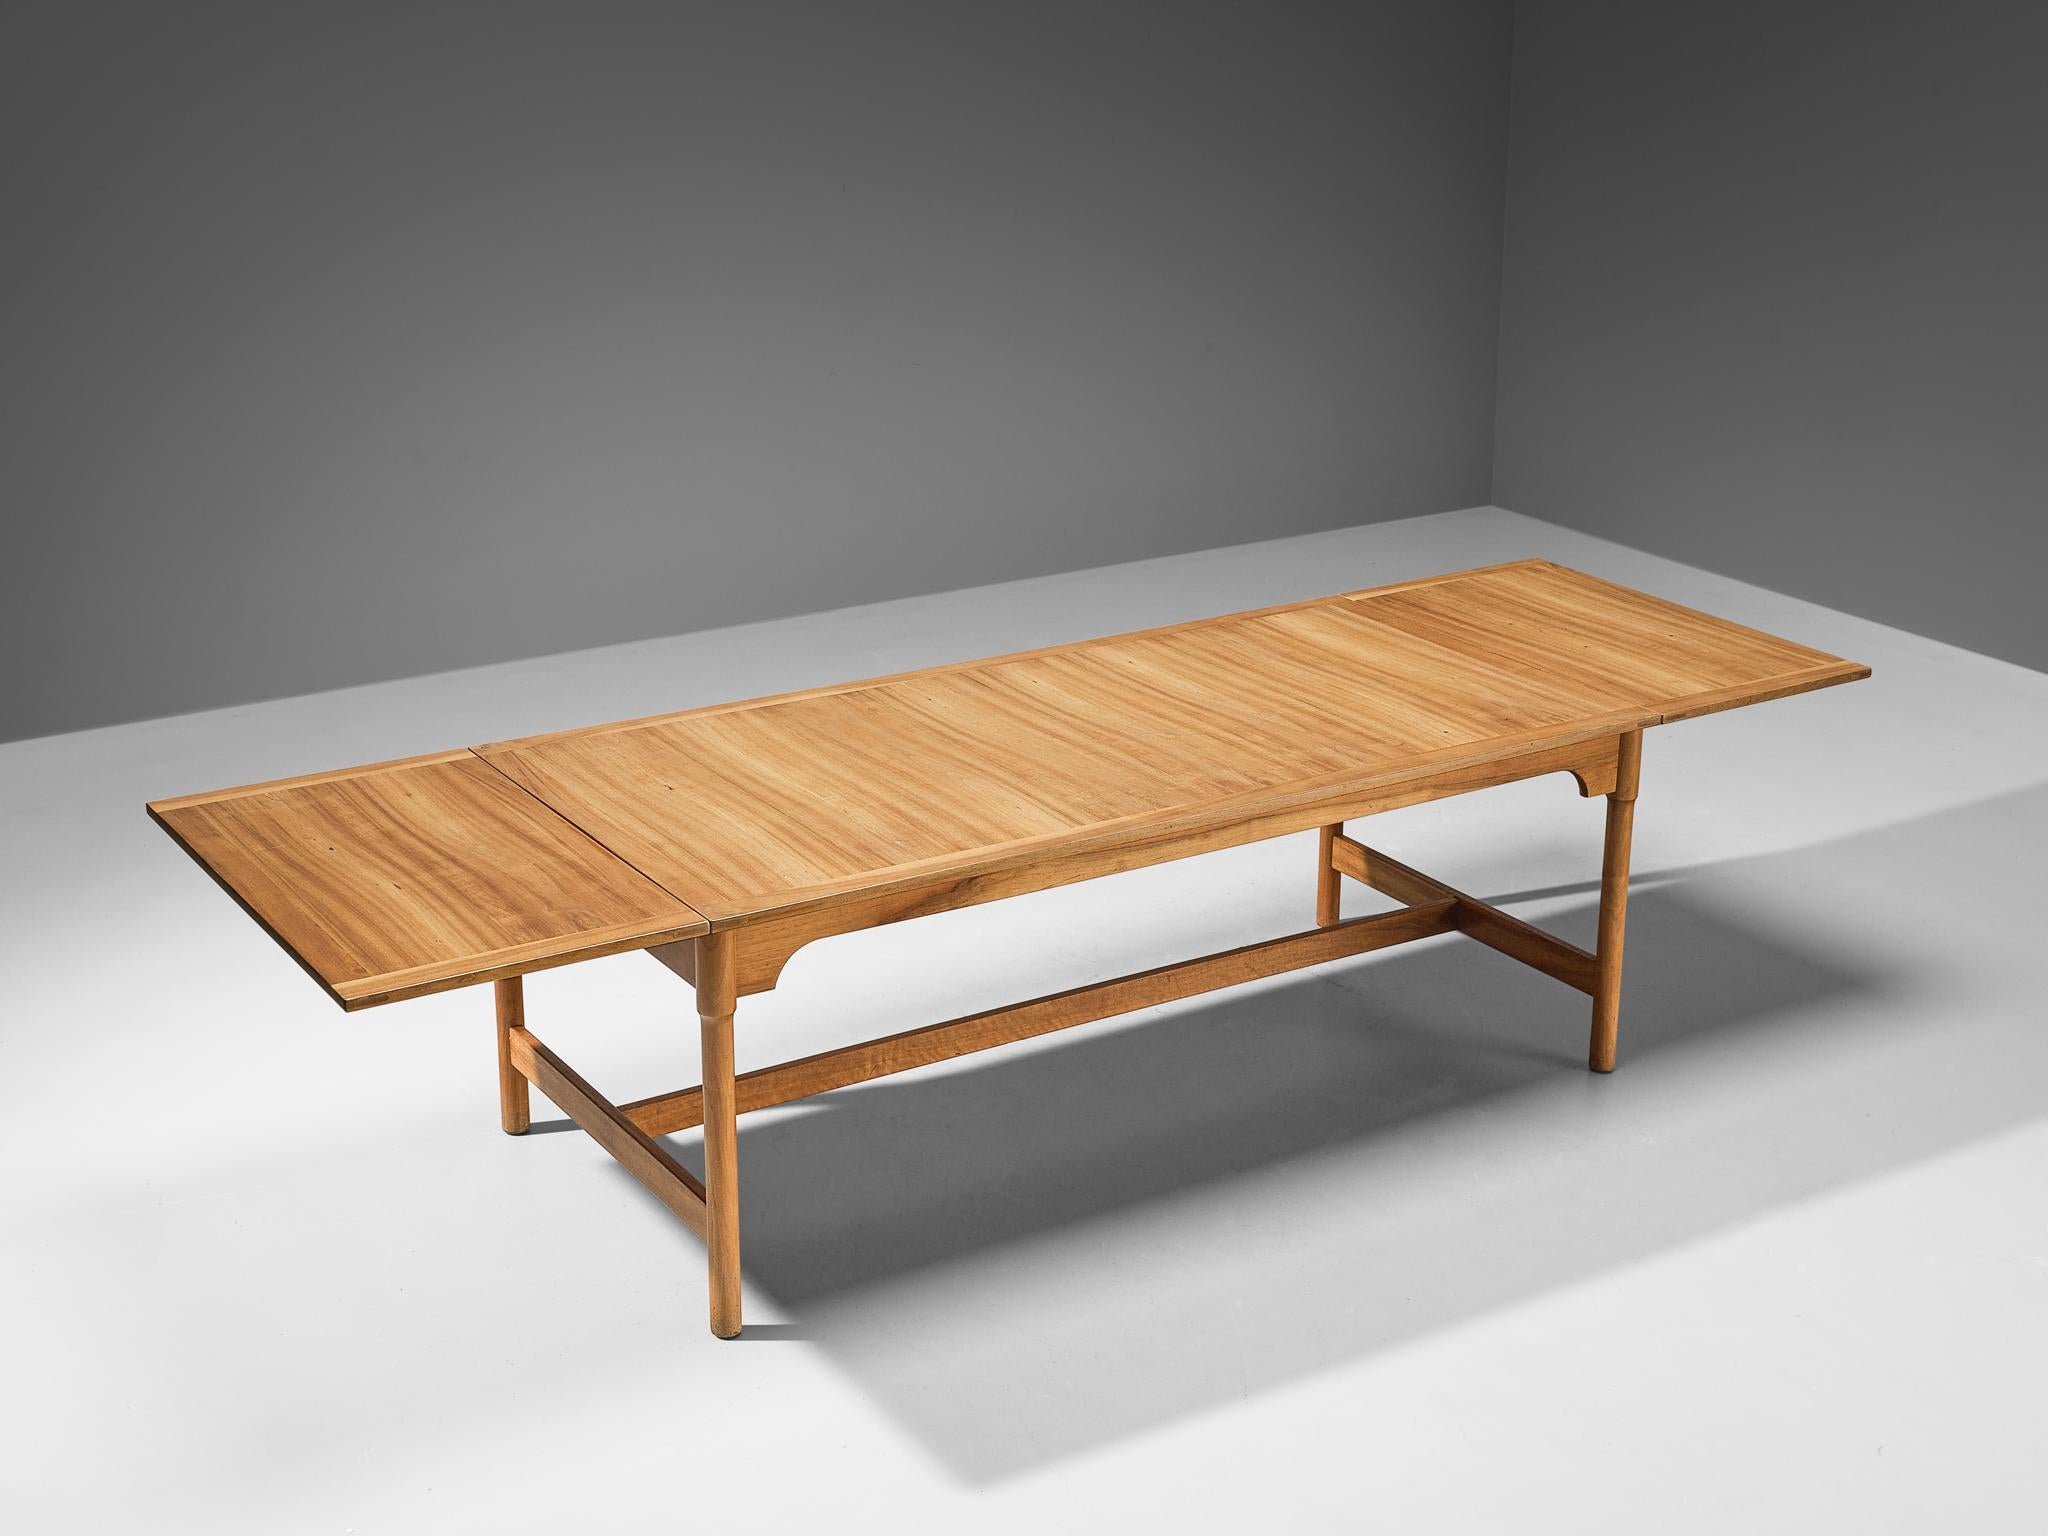 Dining table, walnut, Scandinavia, 1960s

A truly stunning dining table that was made in Scandinavia in 1960s. This piece is made in walnut wood, that has amazing grain and quality to it. What is also remarkable about this table, is the side